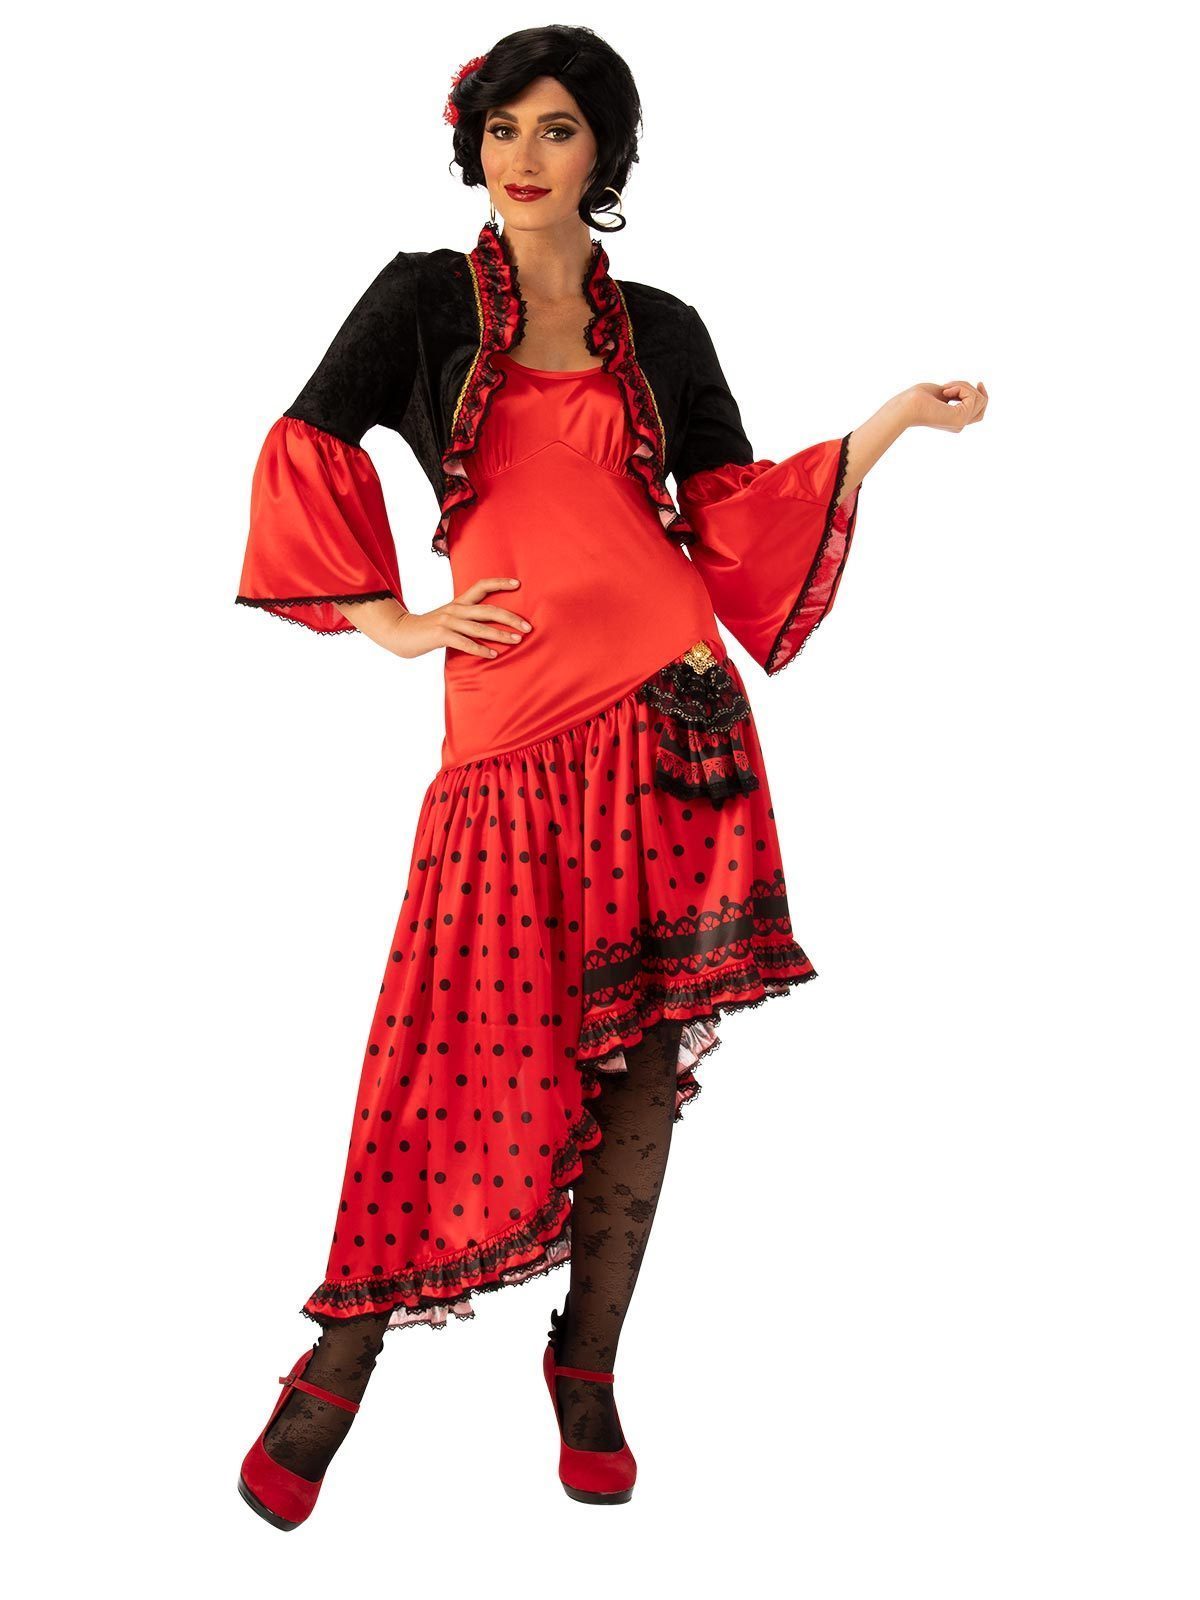 Spanish Dancer Costume for Adults